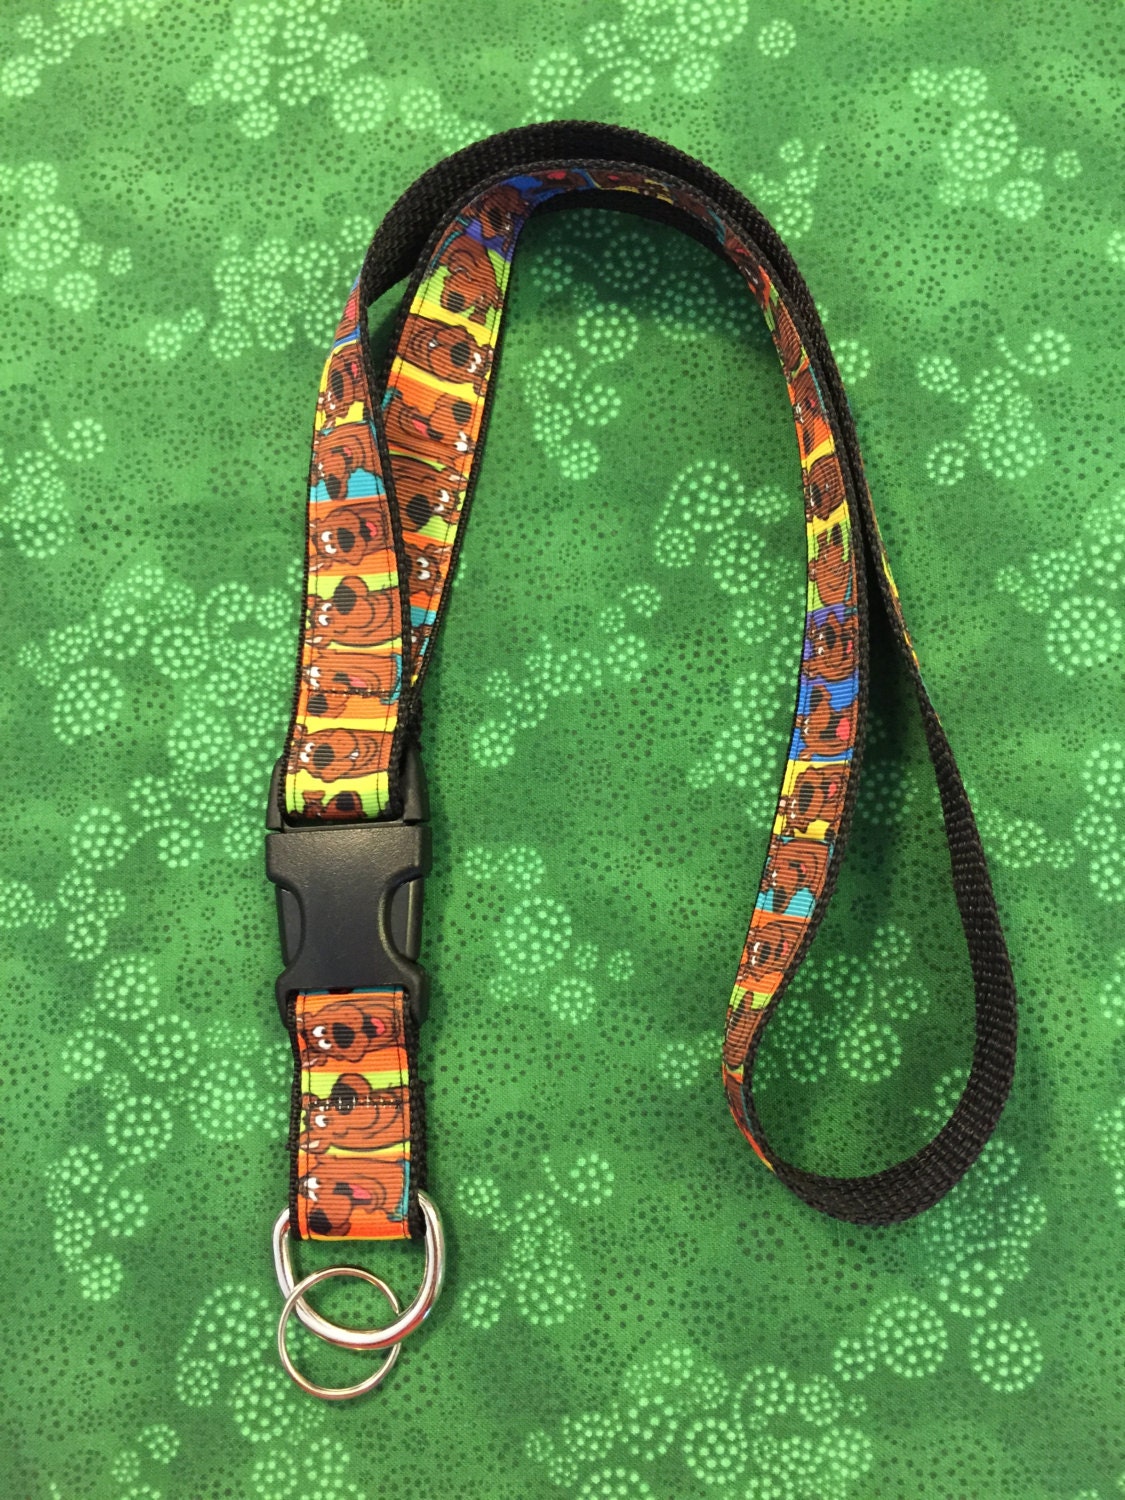 Scooby Dooby Doo Lanyard with removable key chain end by dmbrohm